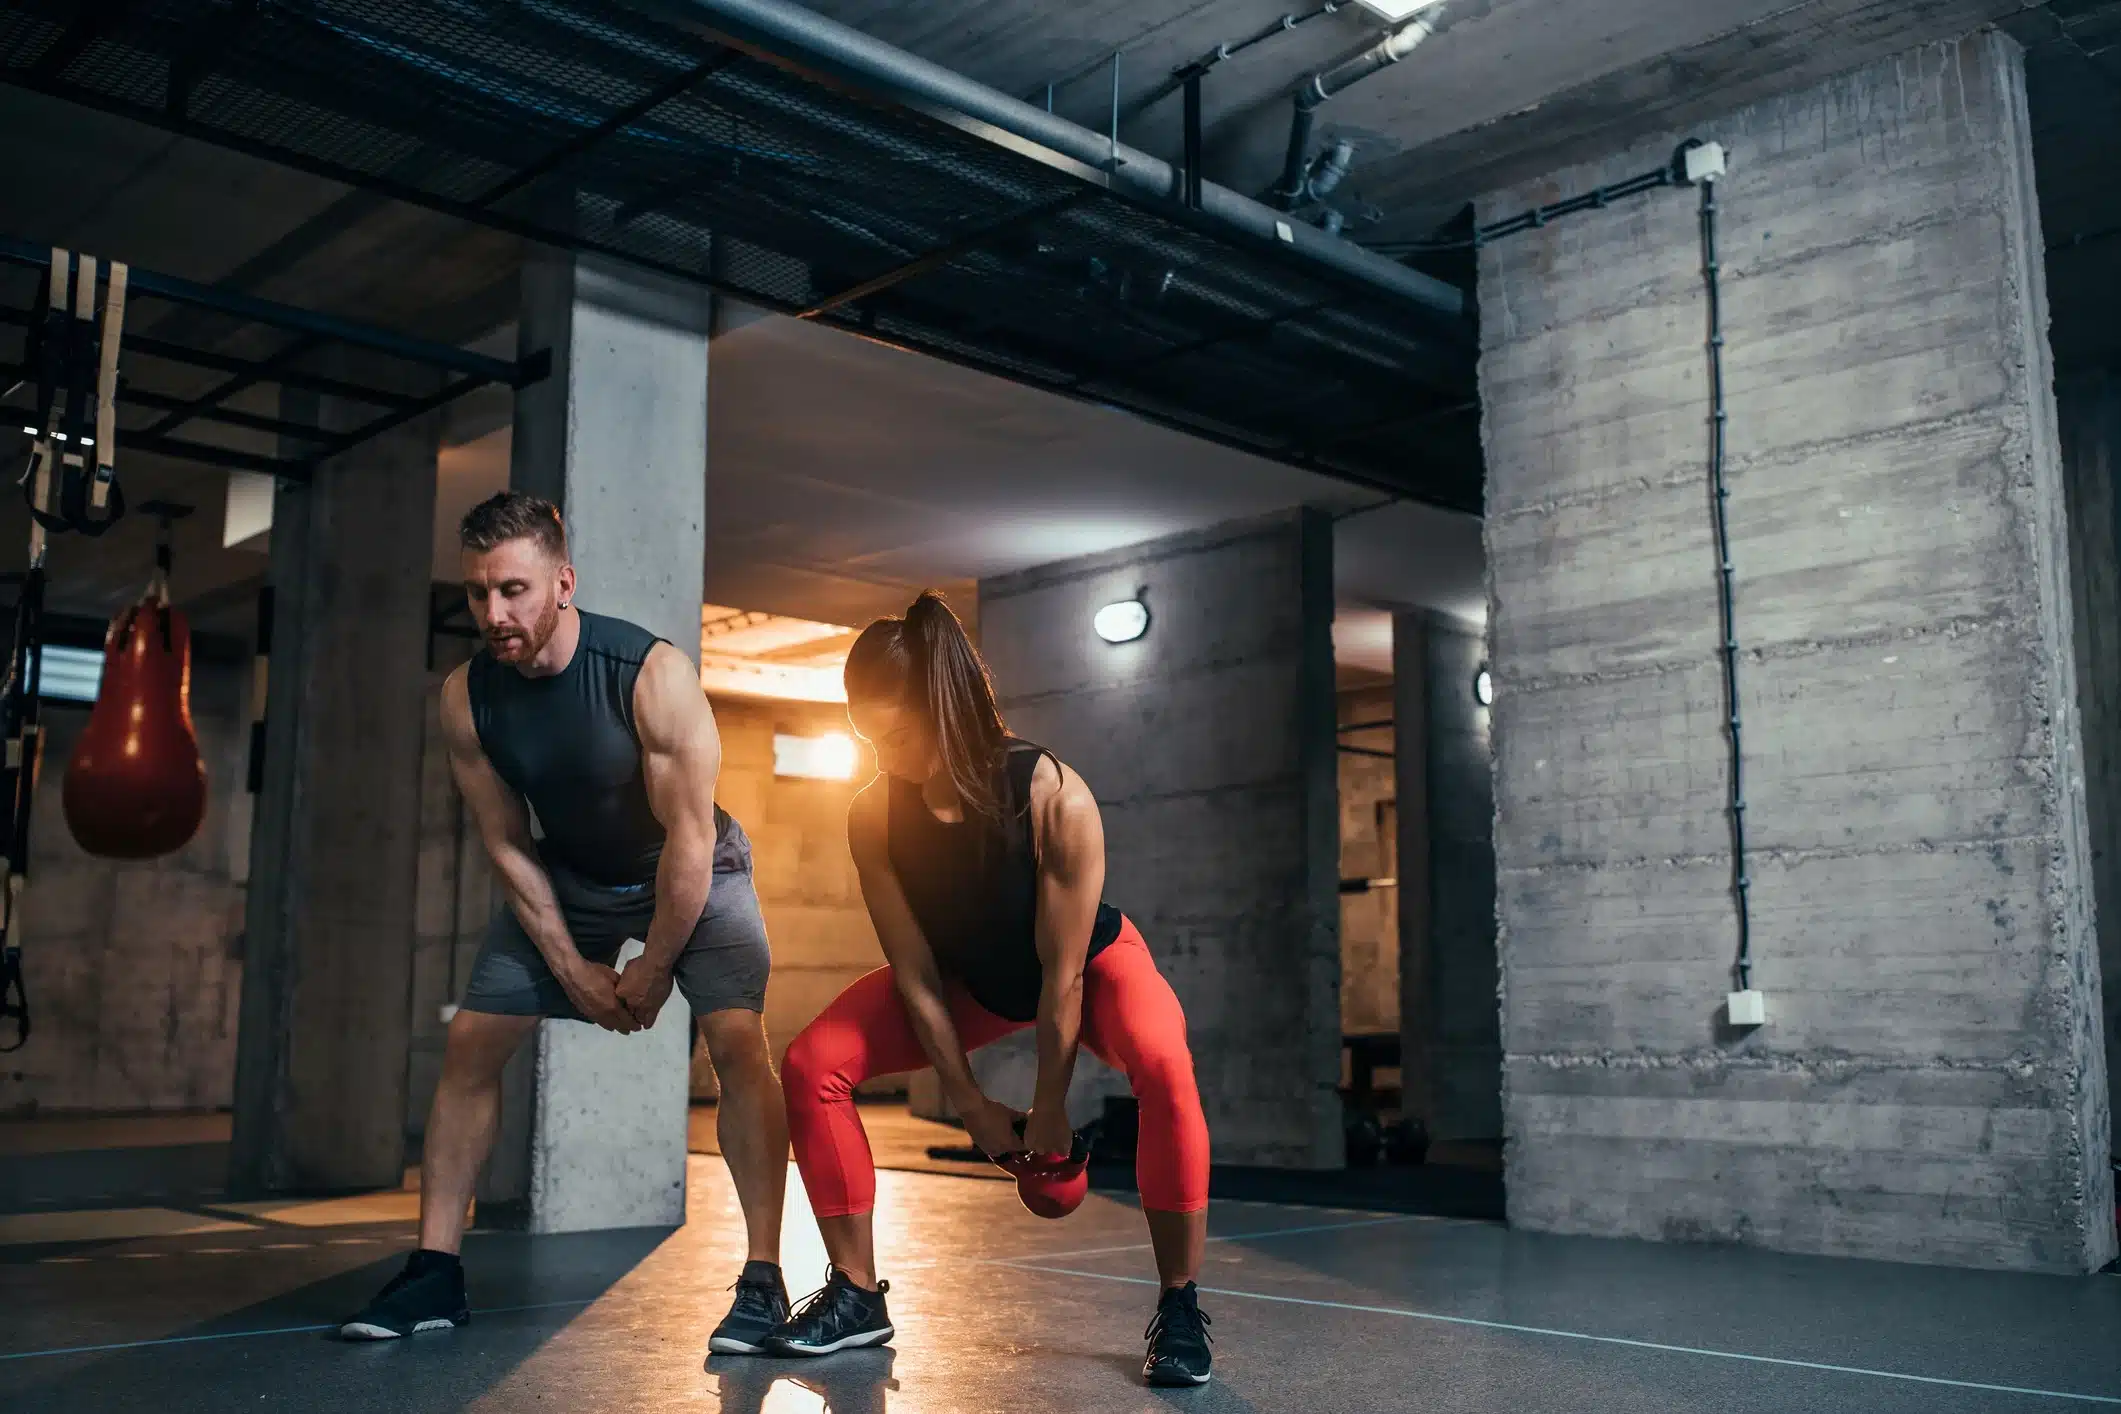 Learn what it takes to start a career as a personal trainer